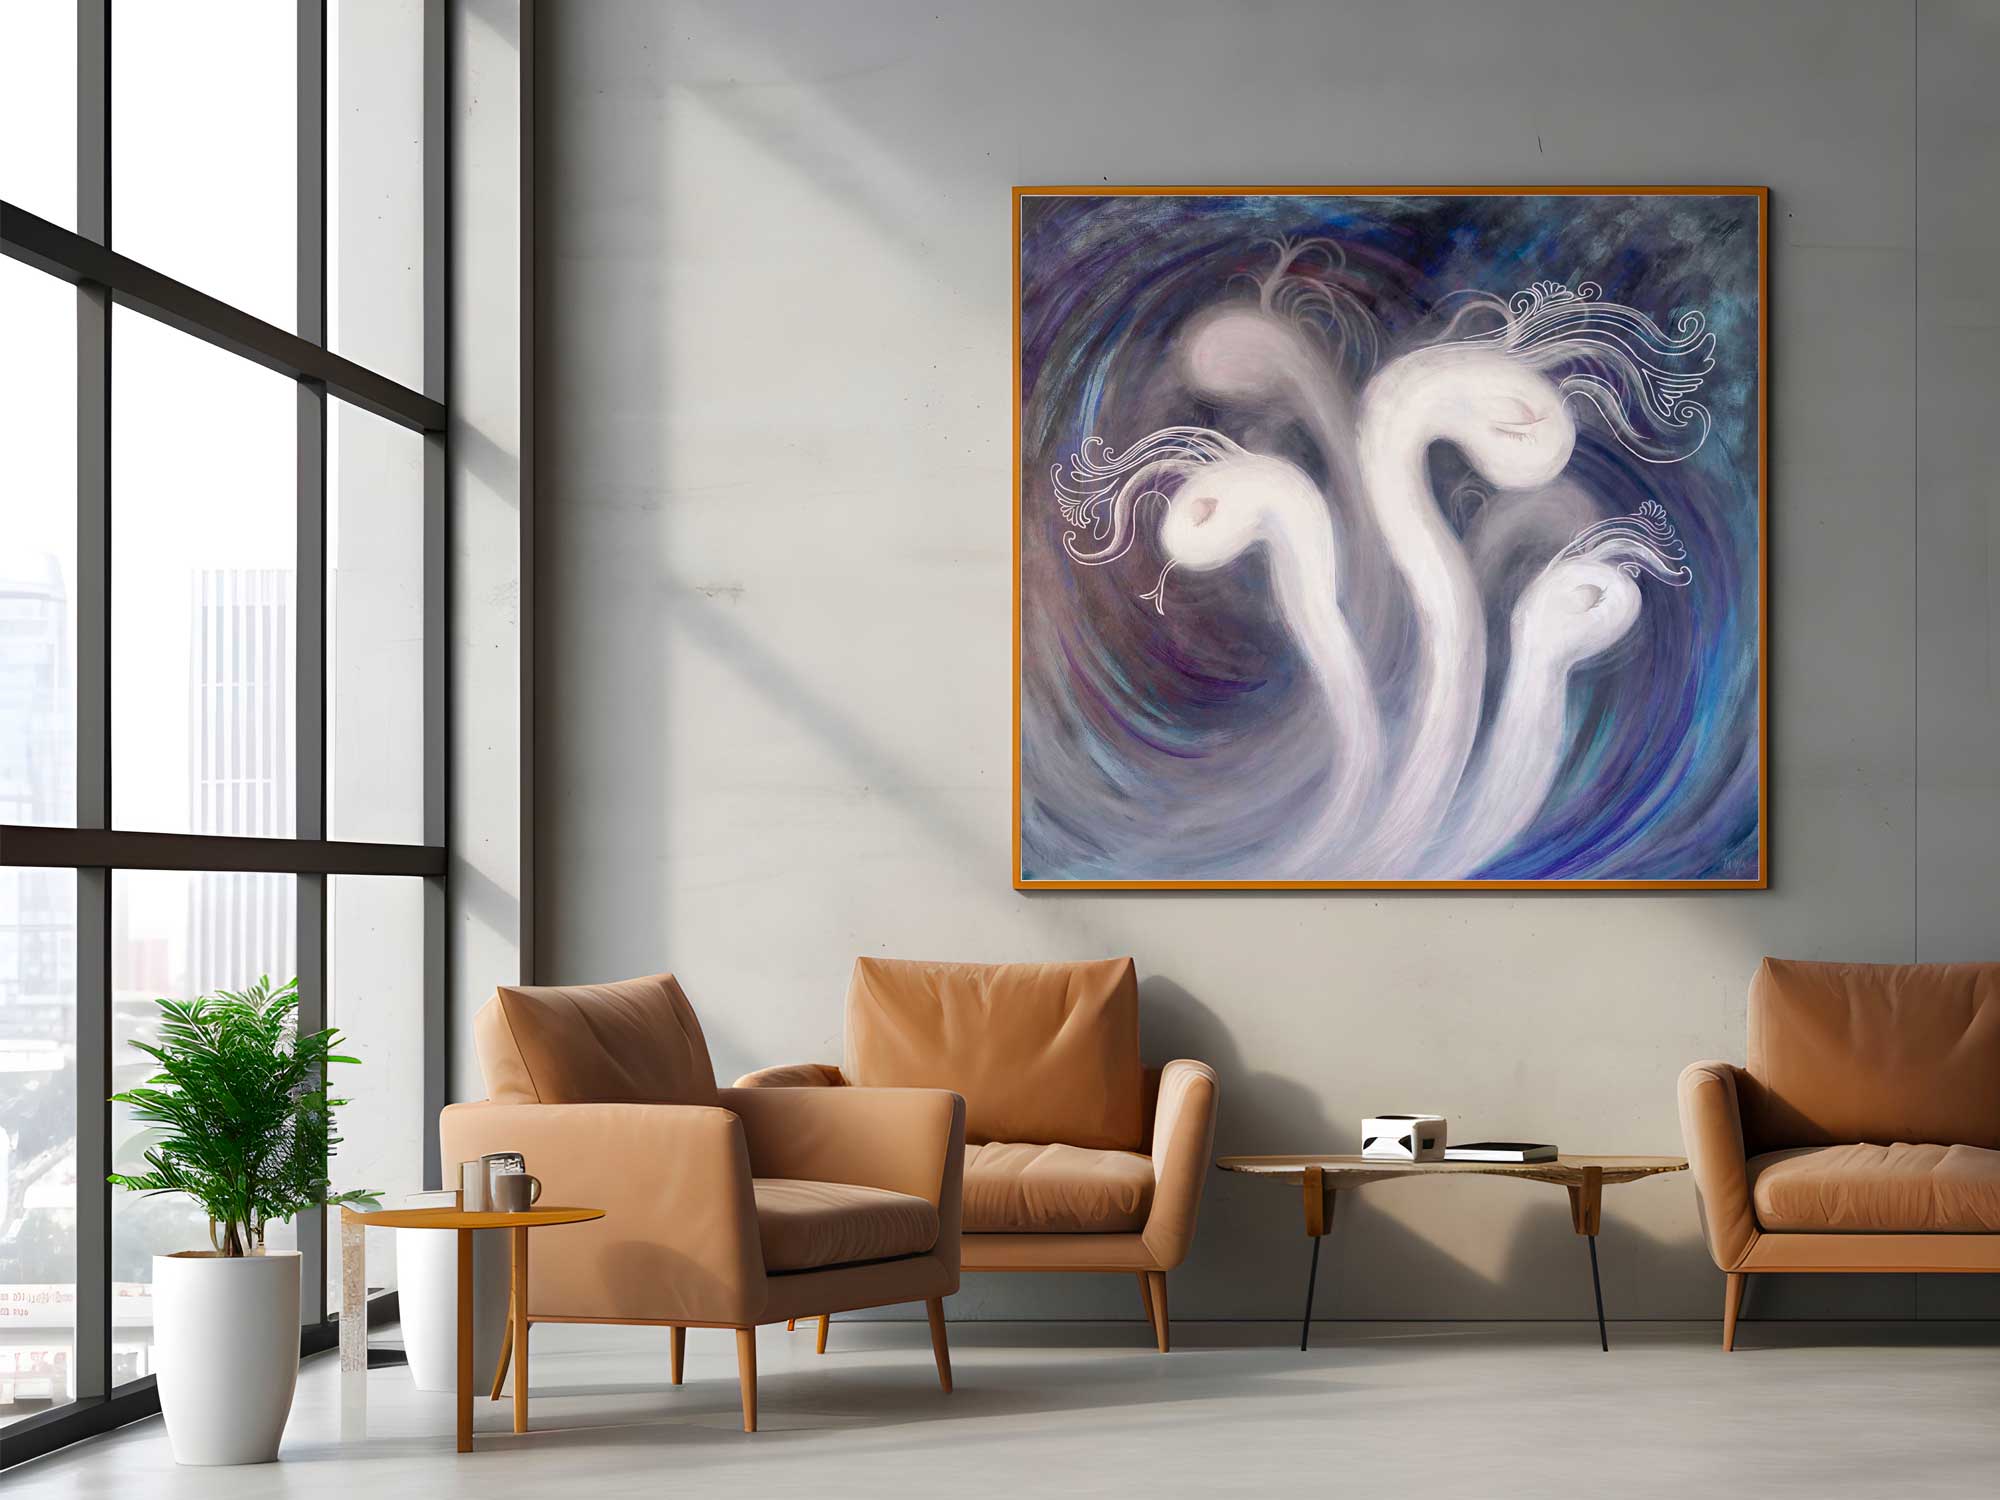 View Phenomenology, an acrylic painting by Canadian artist Tanja Groos, in a contemporary lounge setting.